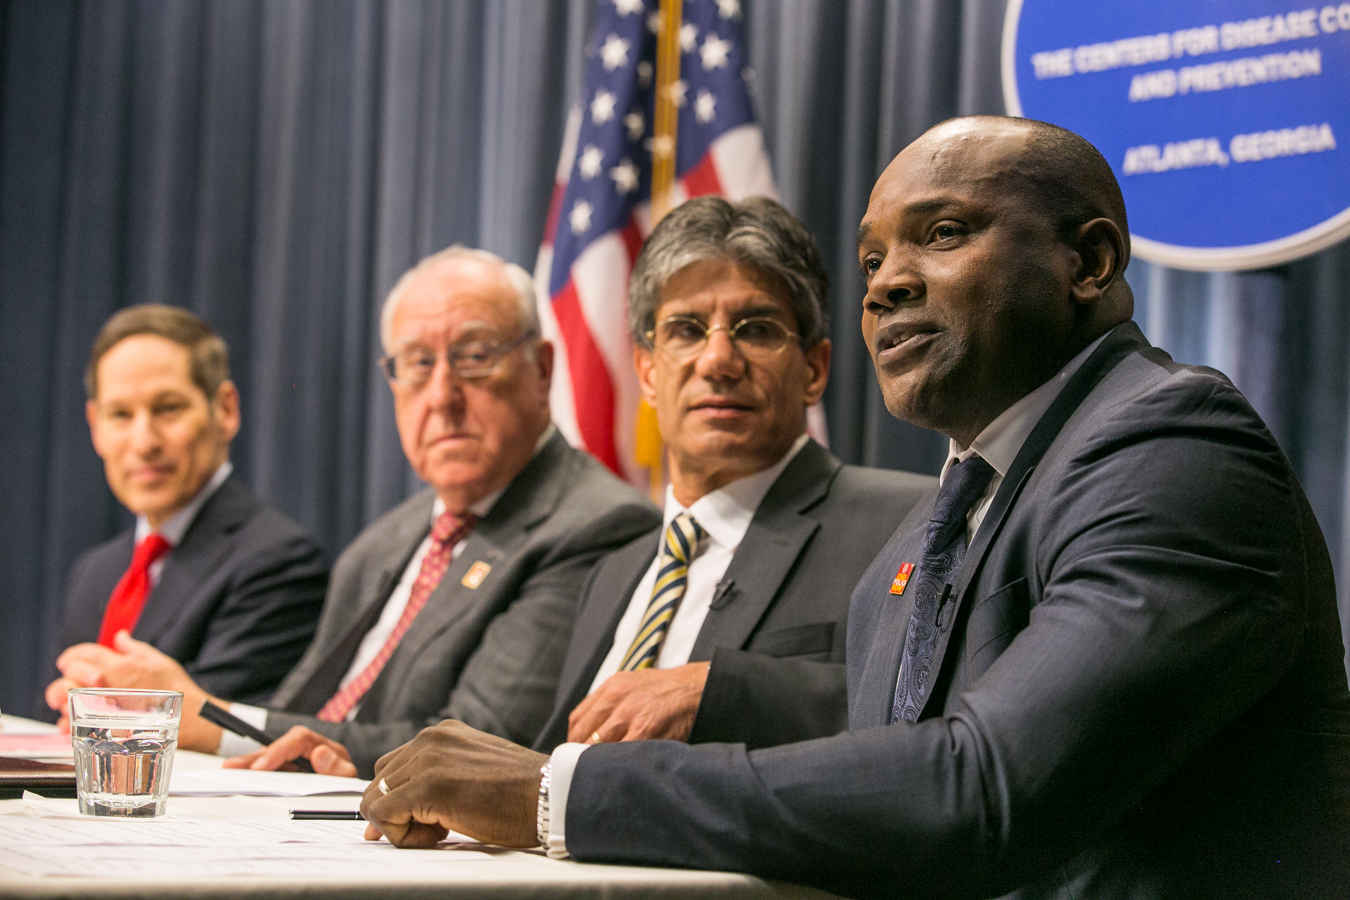 Dennis Ogbe, right, during a World Polio Day panel at the CDC